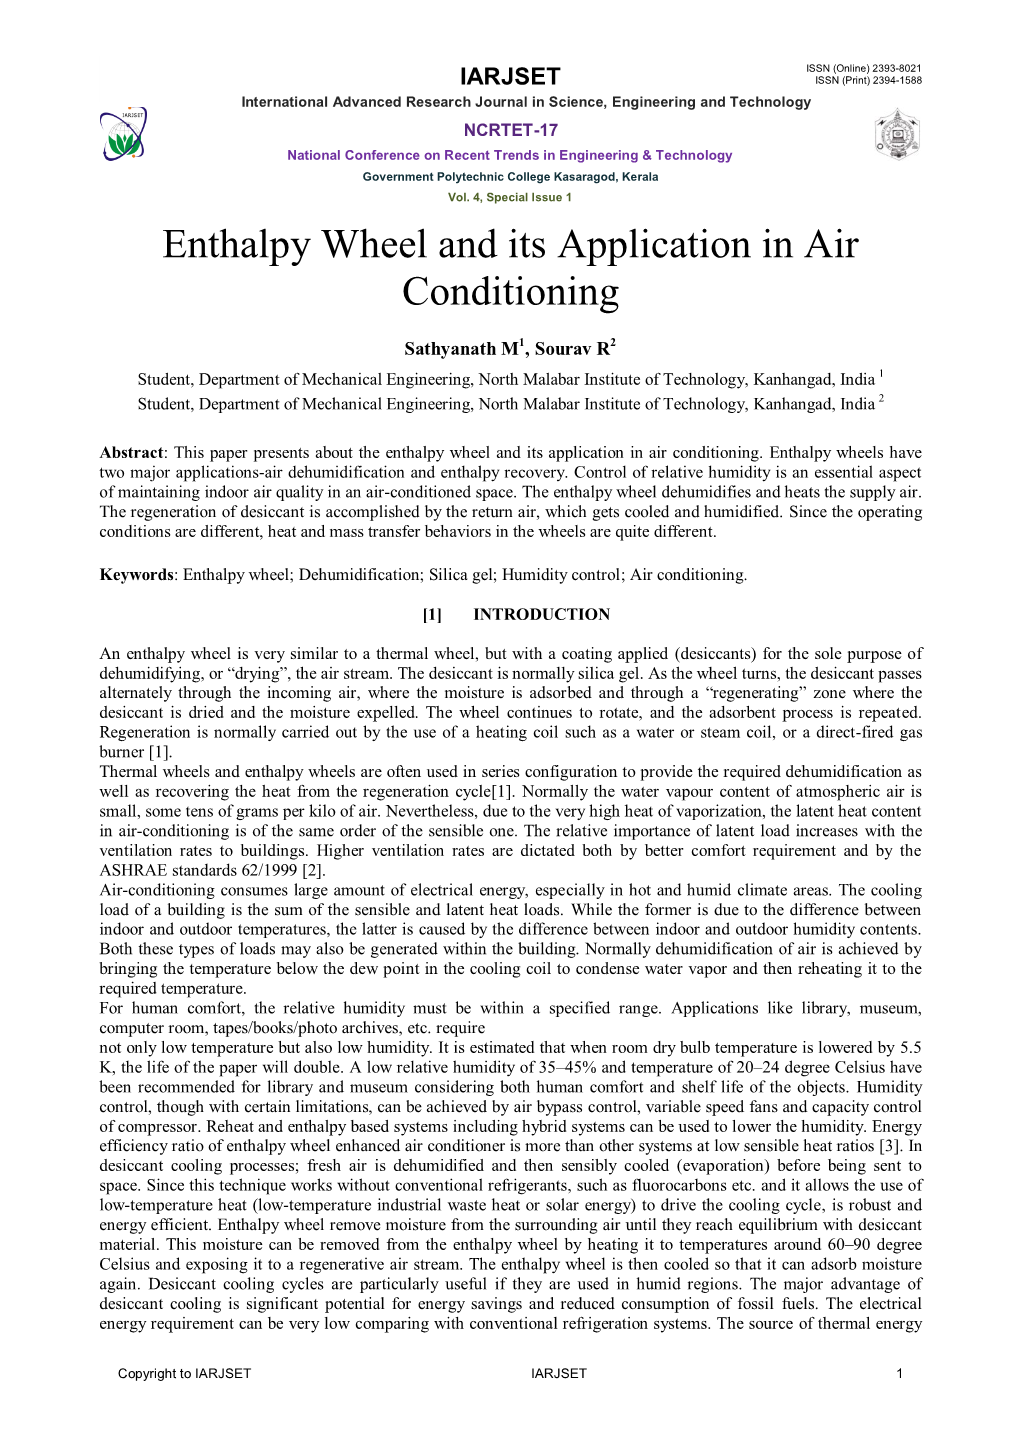 Enthalpy Wheel and Its Application in Air Conditioning